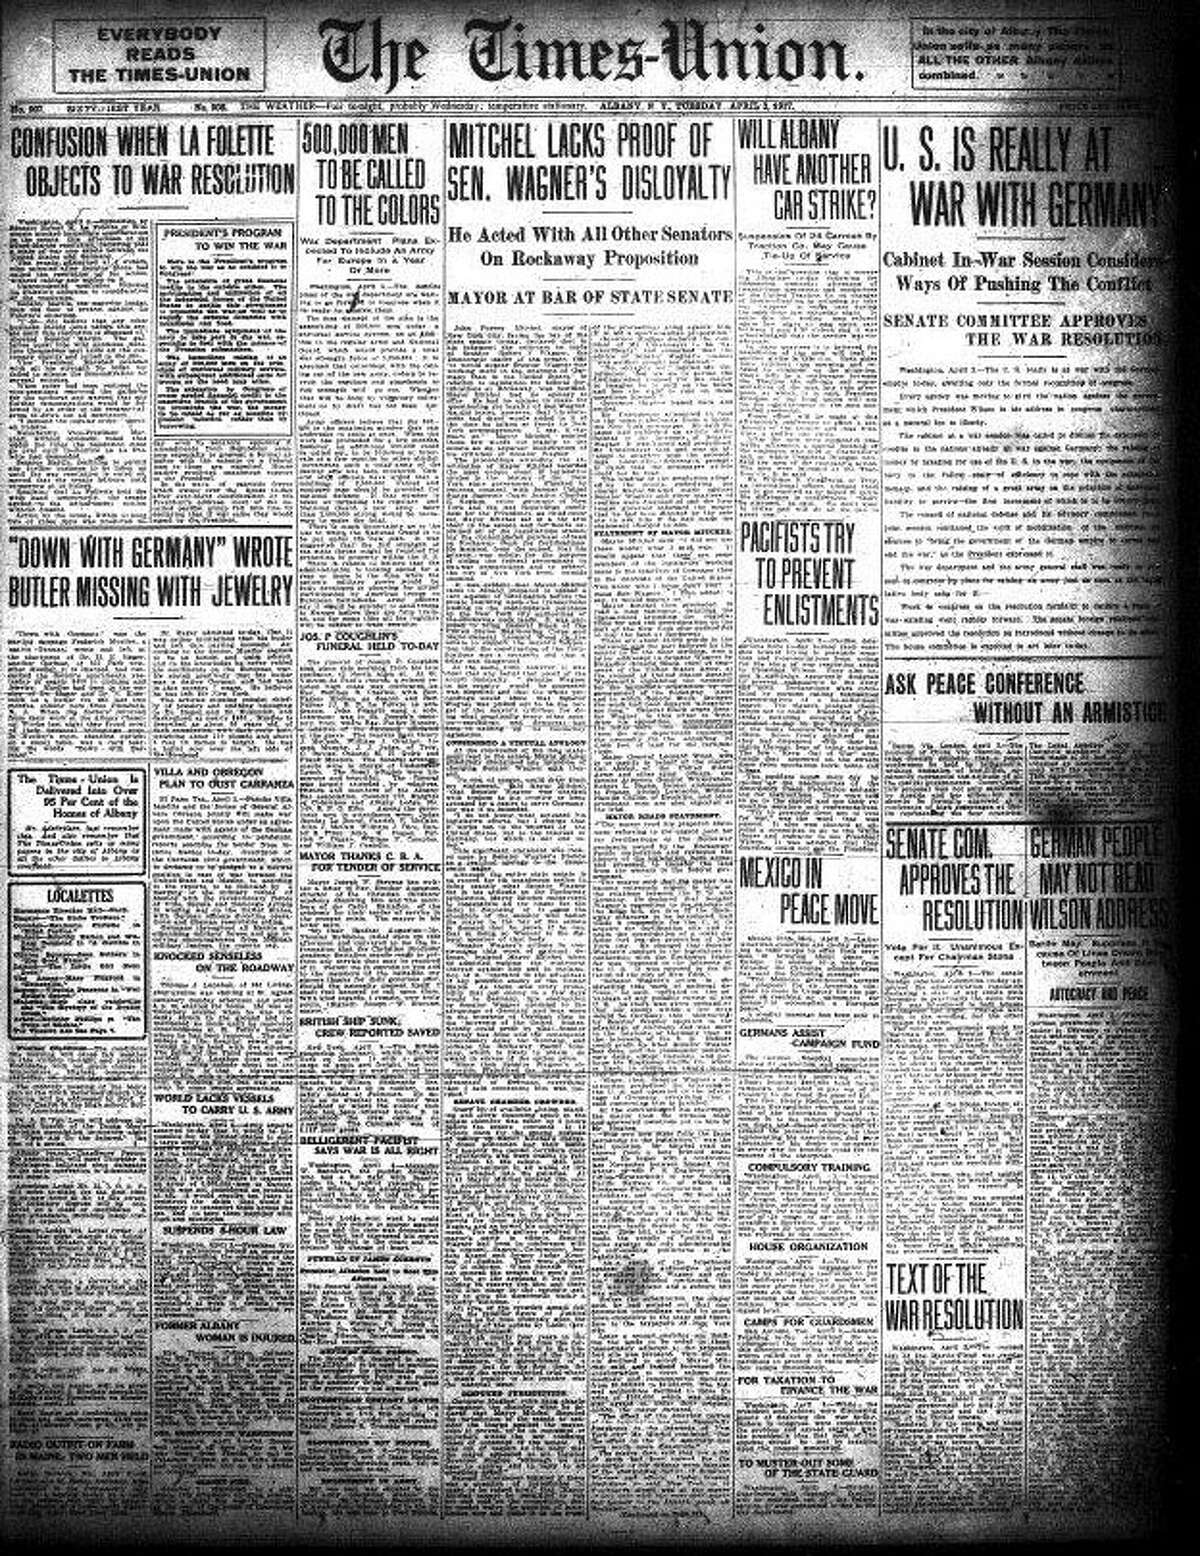 Times Union front page, April 3, 1917, as America entered World War I.